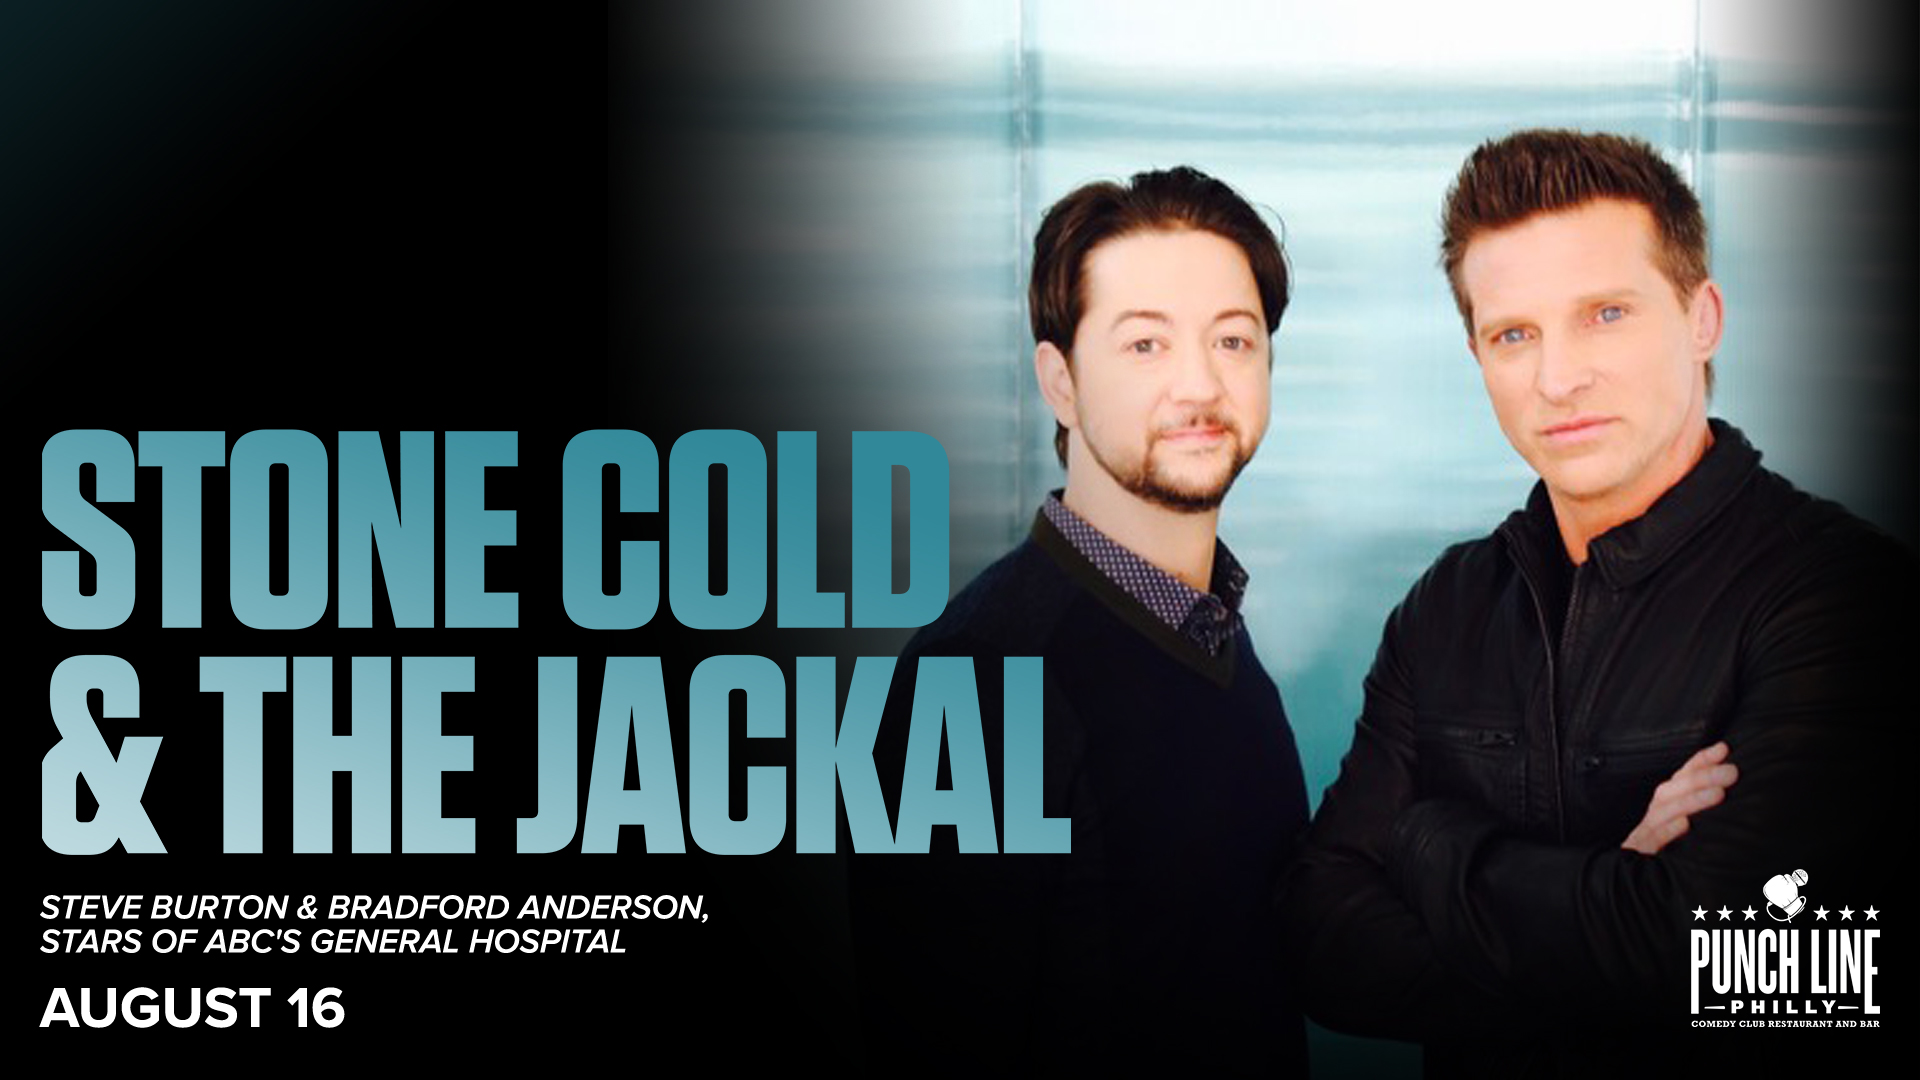 Stone Cold & the Jackal Tour: Steve Burton & Bradford Anderson from GH